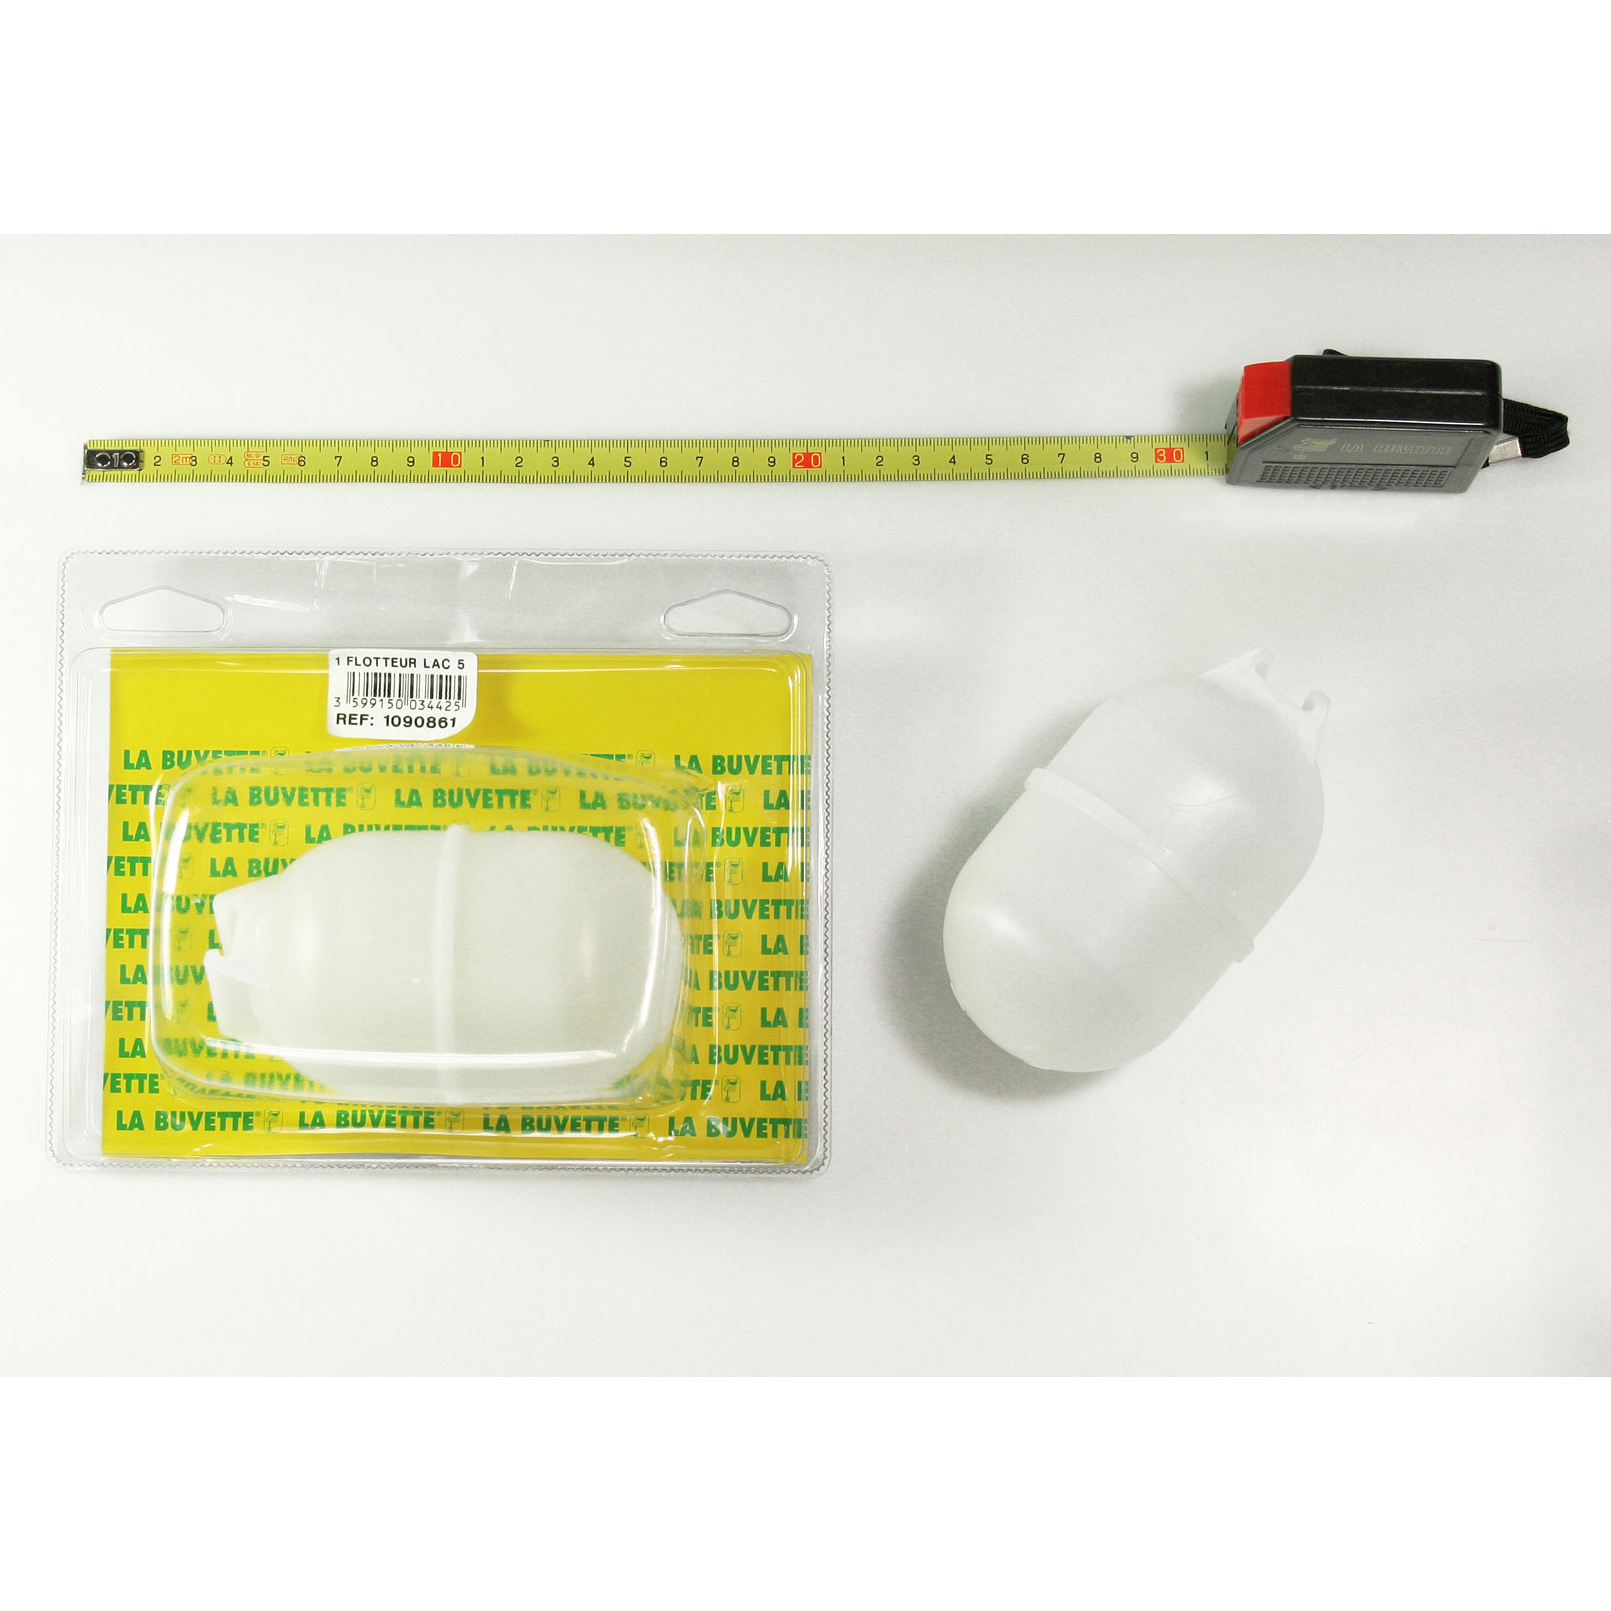 FLOAT LAC 5 BLISTER PACK